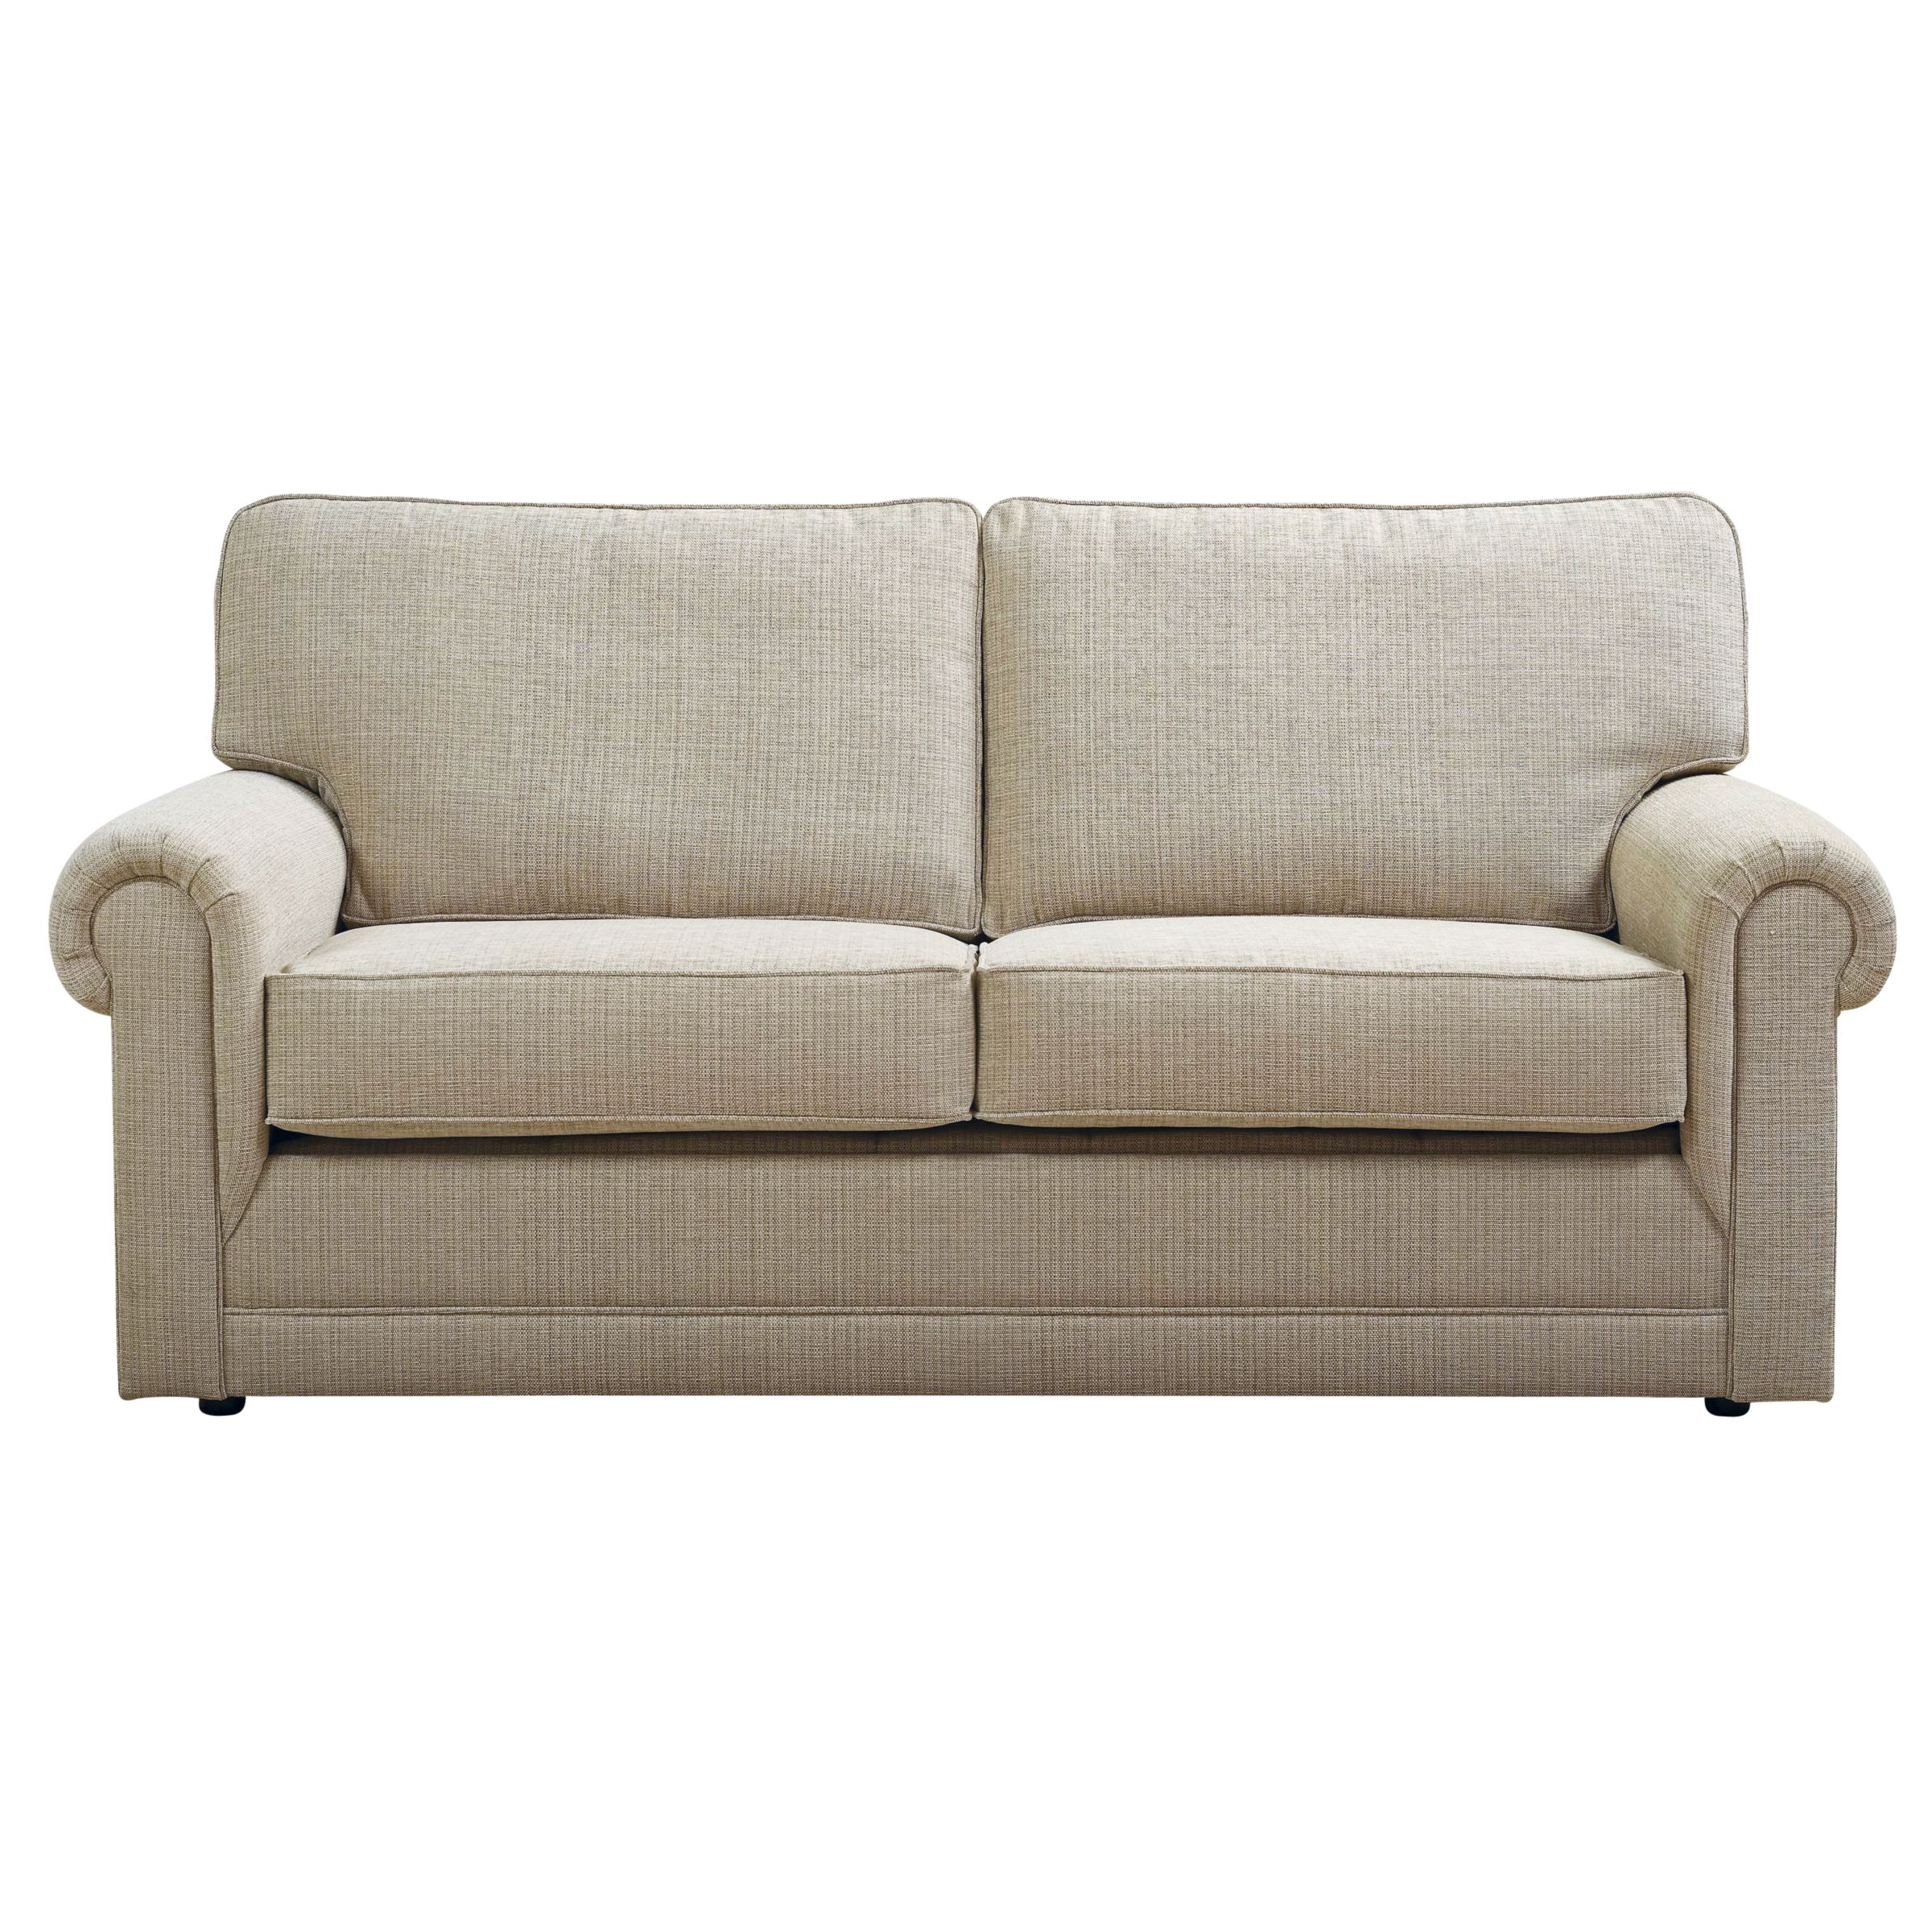 Elgar Large Sofa Bed with Pocket